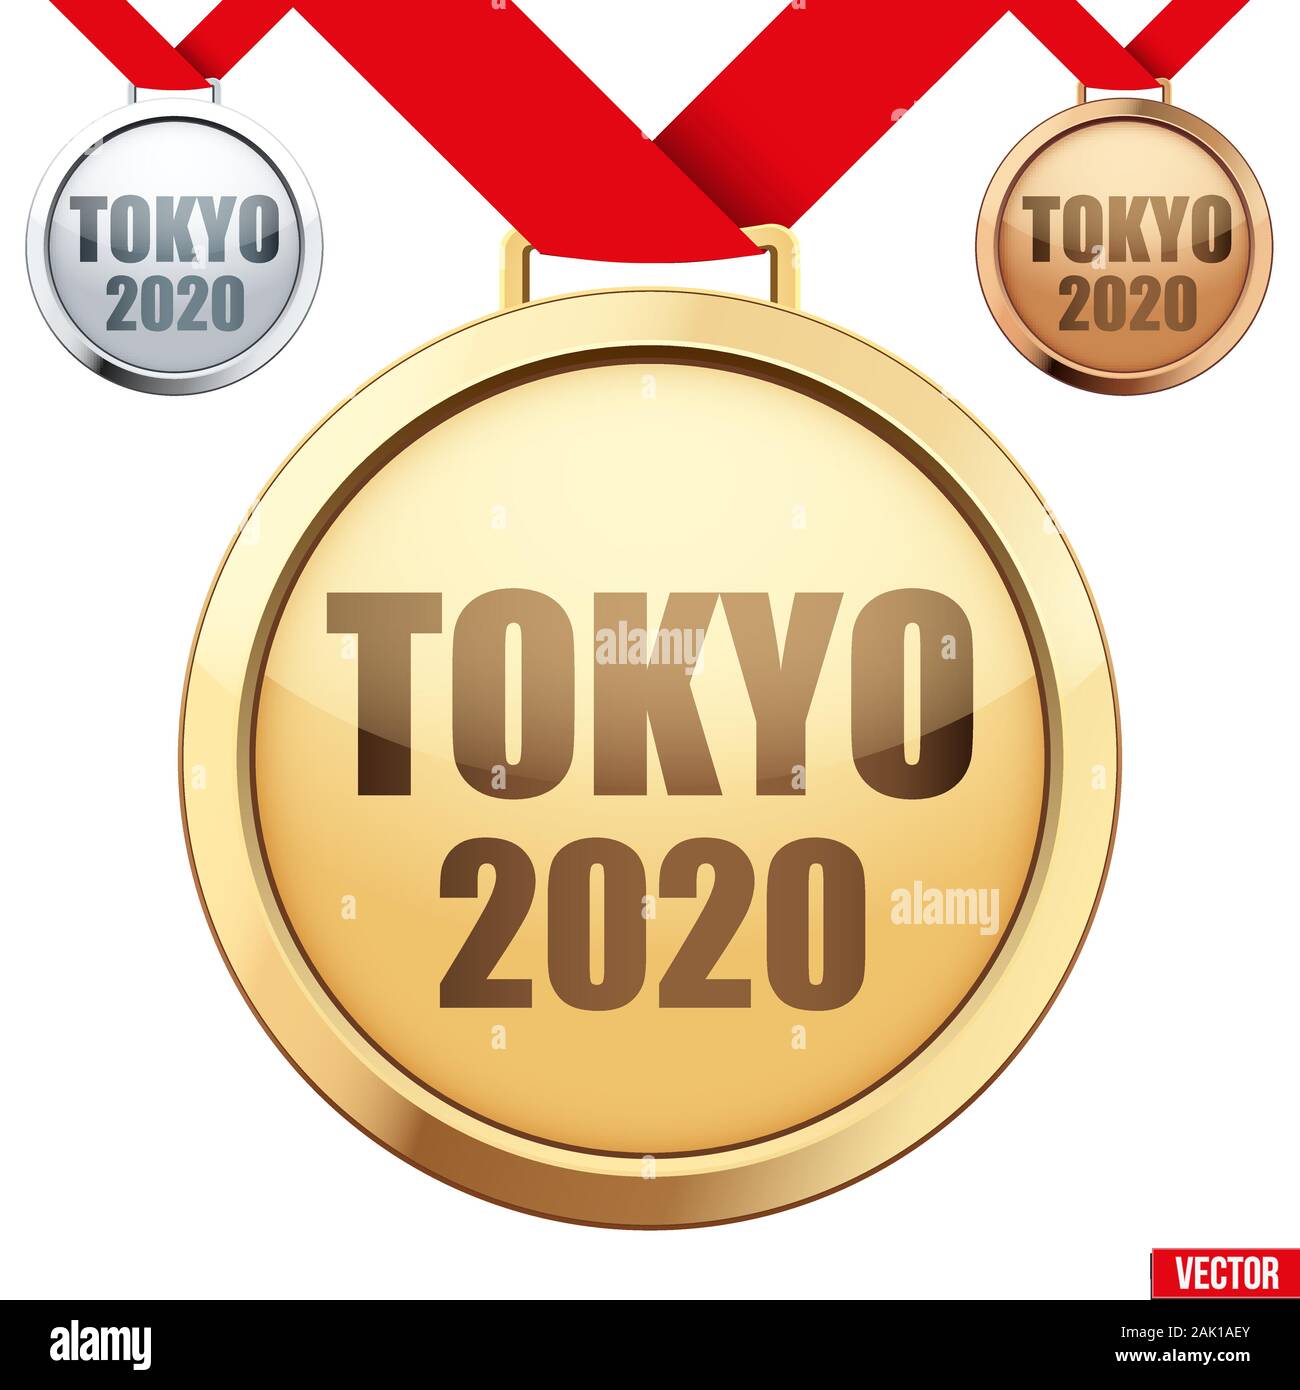 Set of medals with text Tokyo 2020 Stock Vector